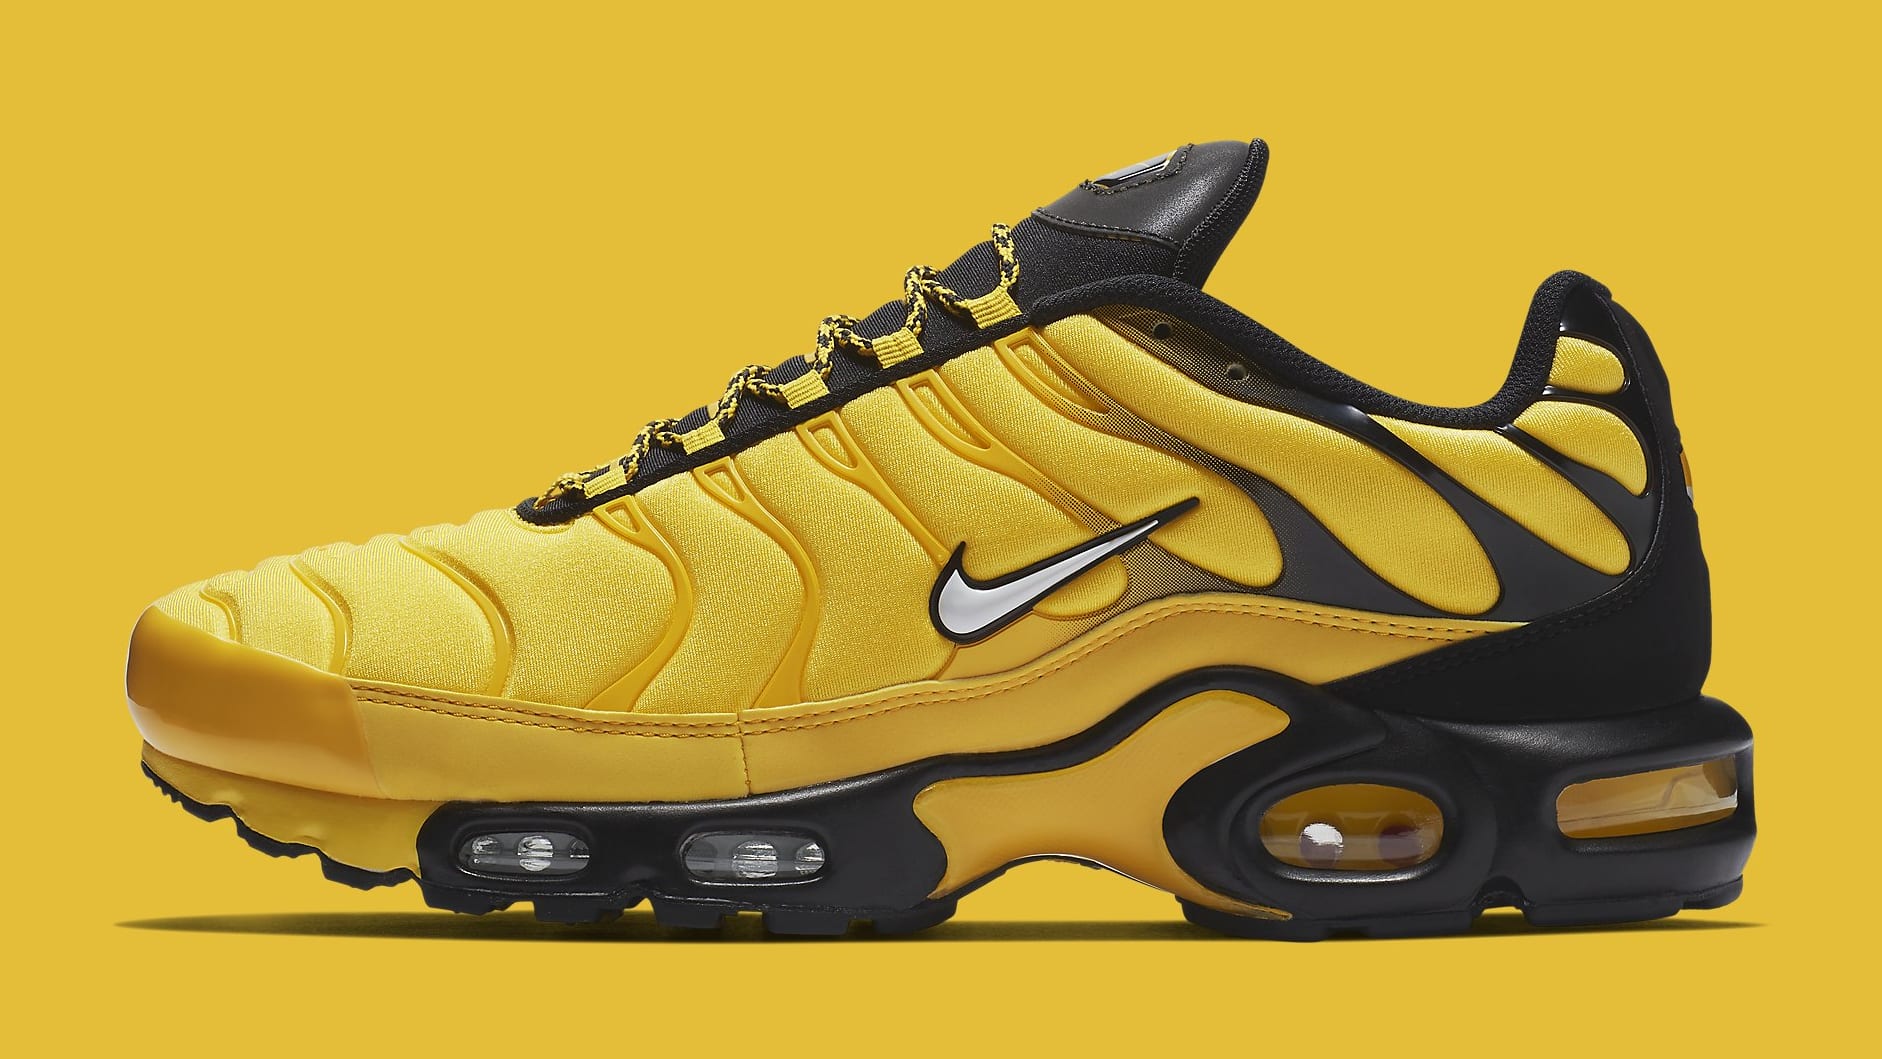 Drake's Favorite Nikes Releasing in Bright Yellow | Complex